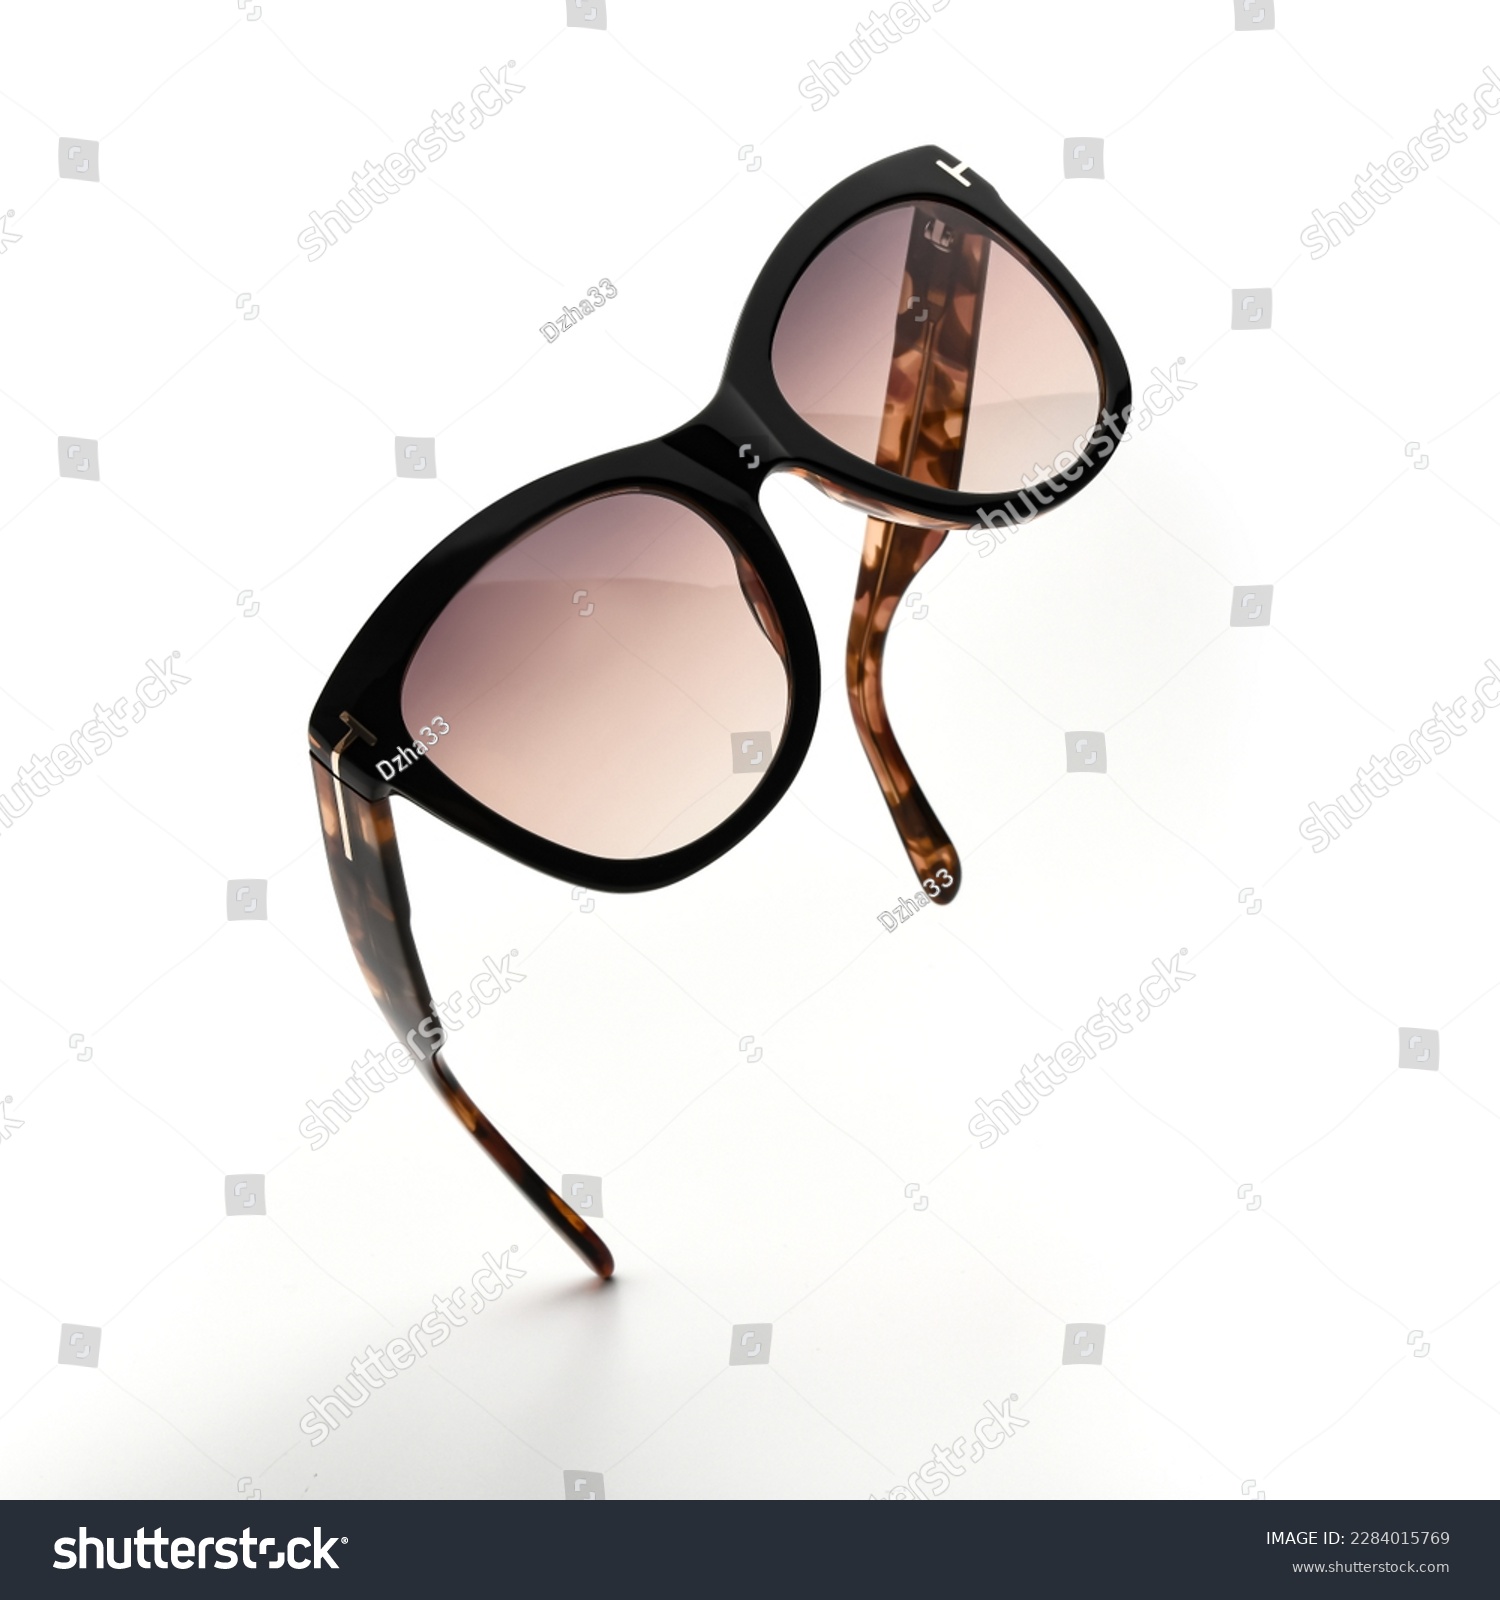 Sunglasses in flying isolated on white and grey background. Sunglasses summer woman fashion accessories as design element for promo or advertising banner. Glasses black leopard color with vintage #2284015769